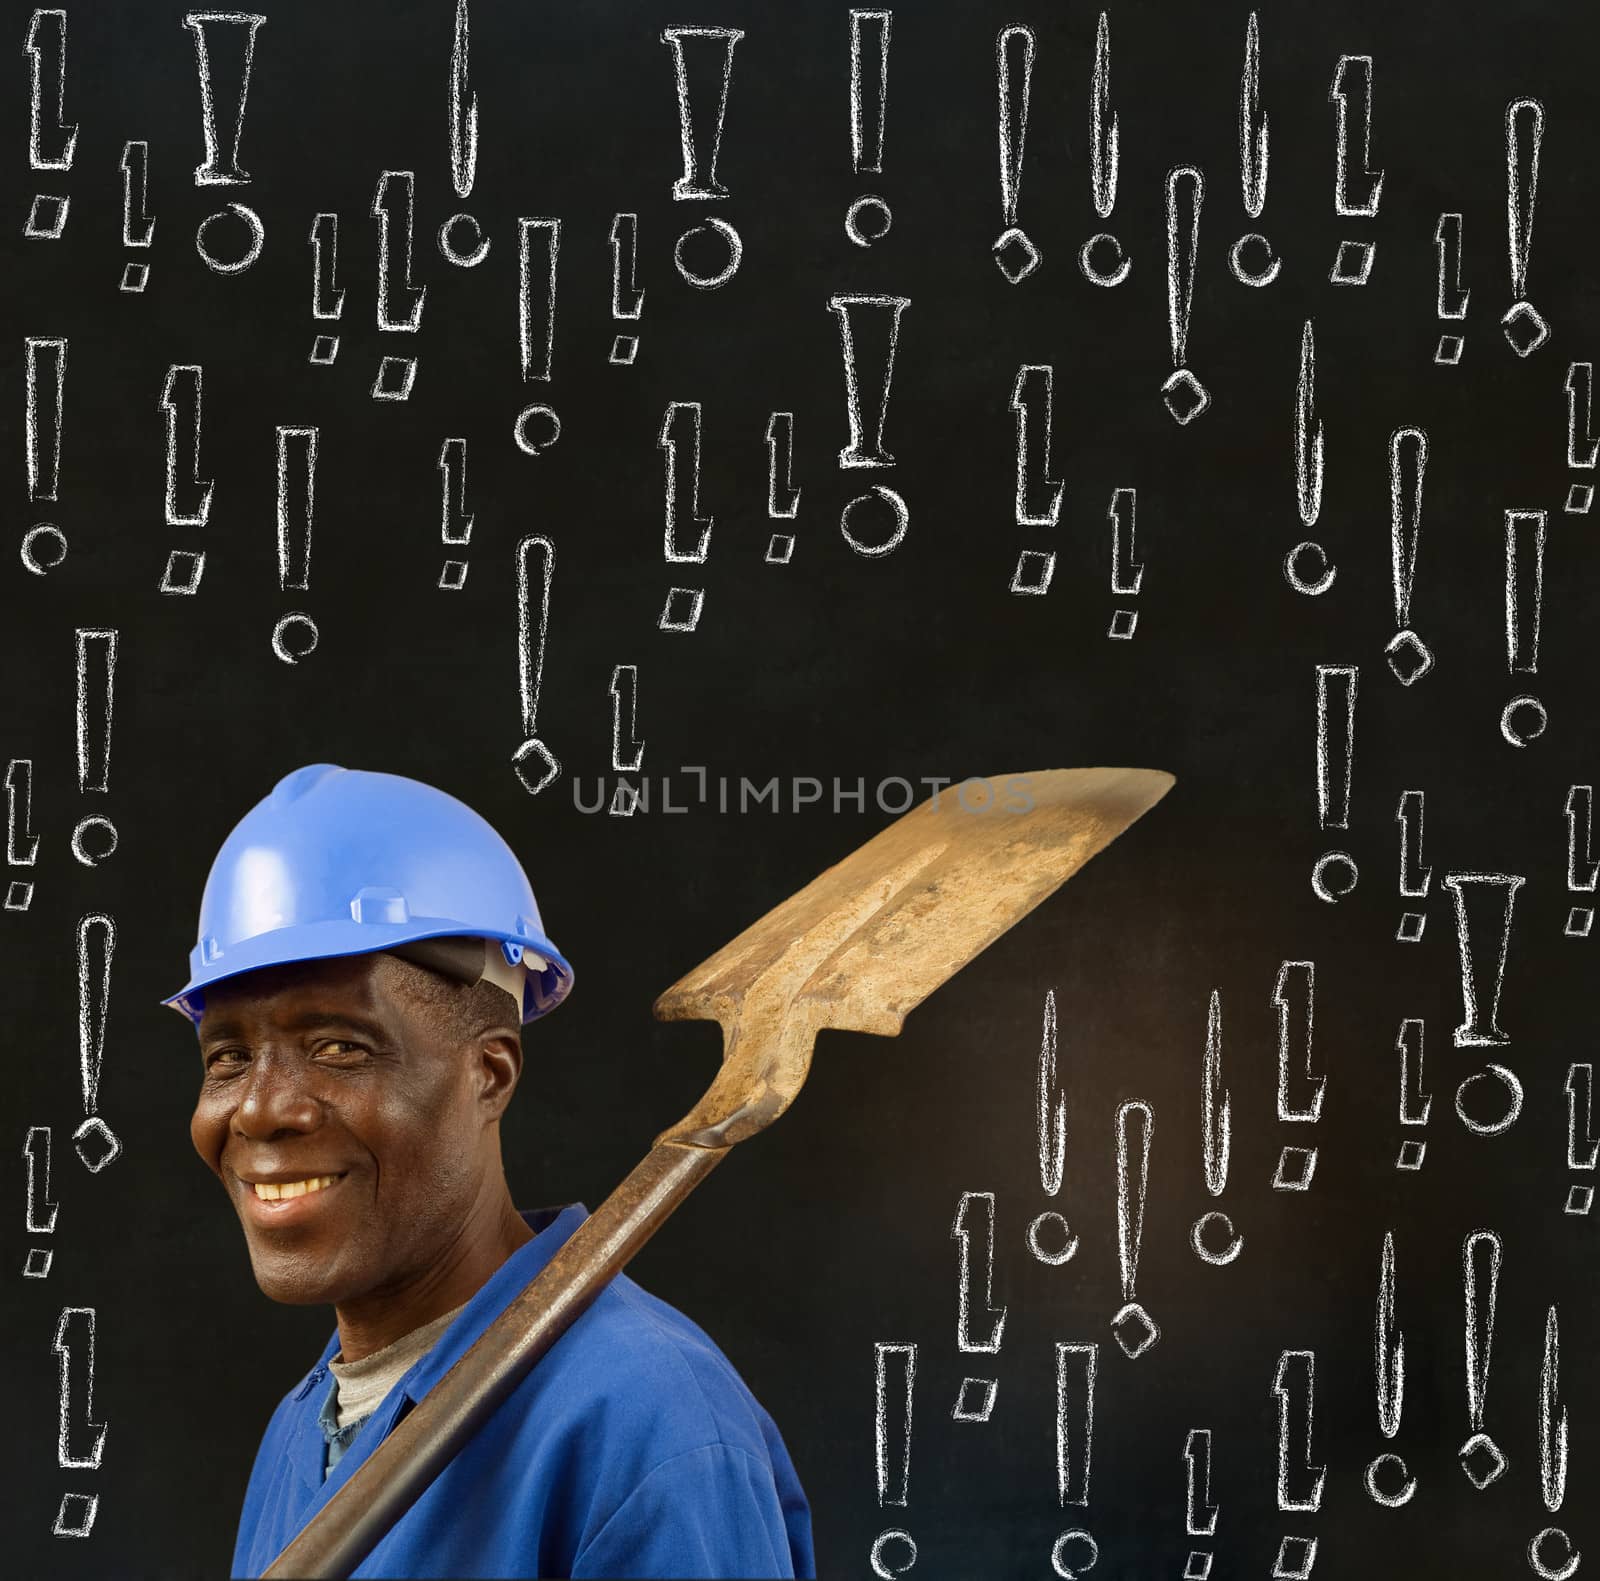 African American black man worker with chalk safety warning exclamation marks on blackboard background